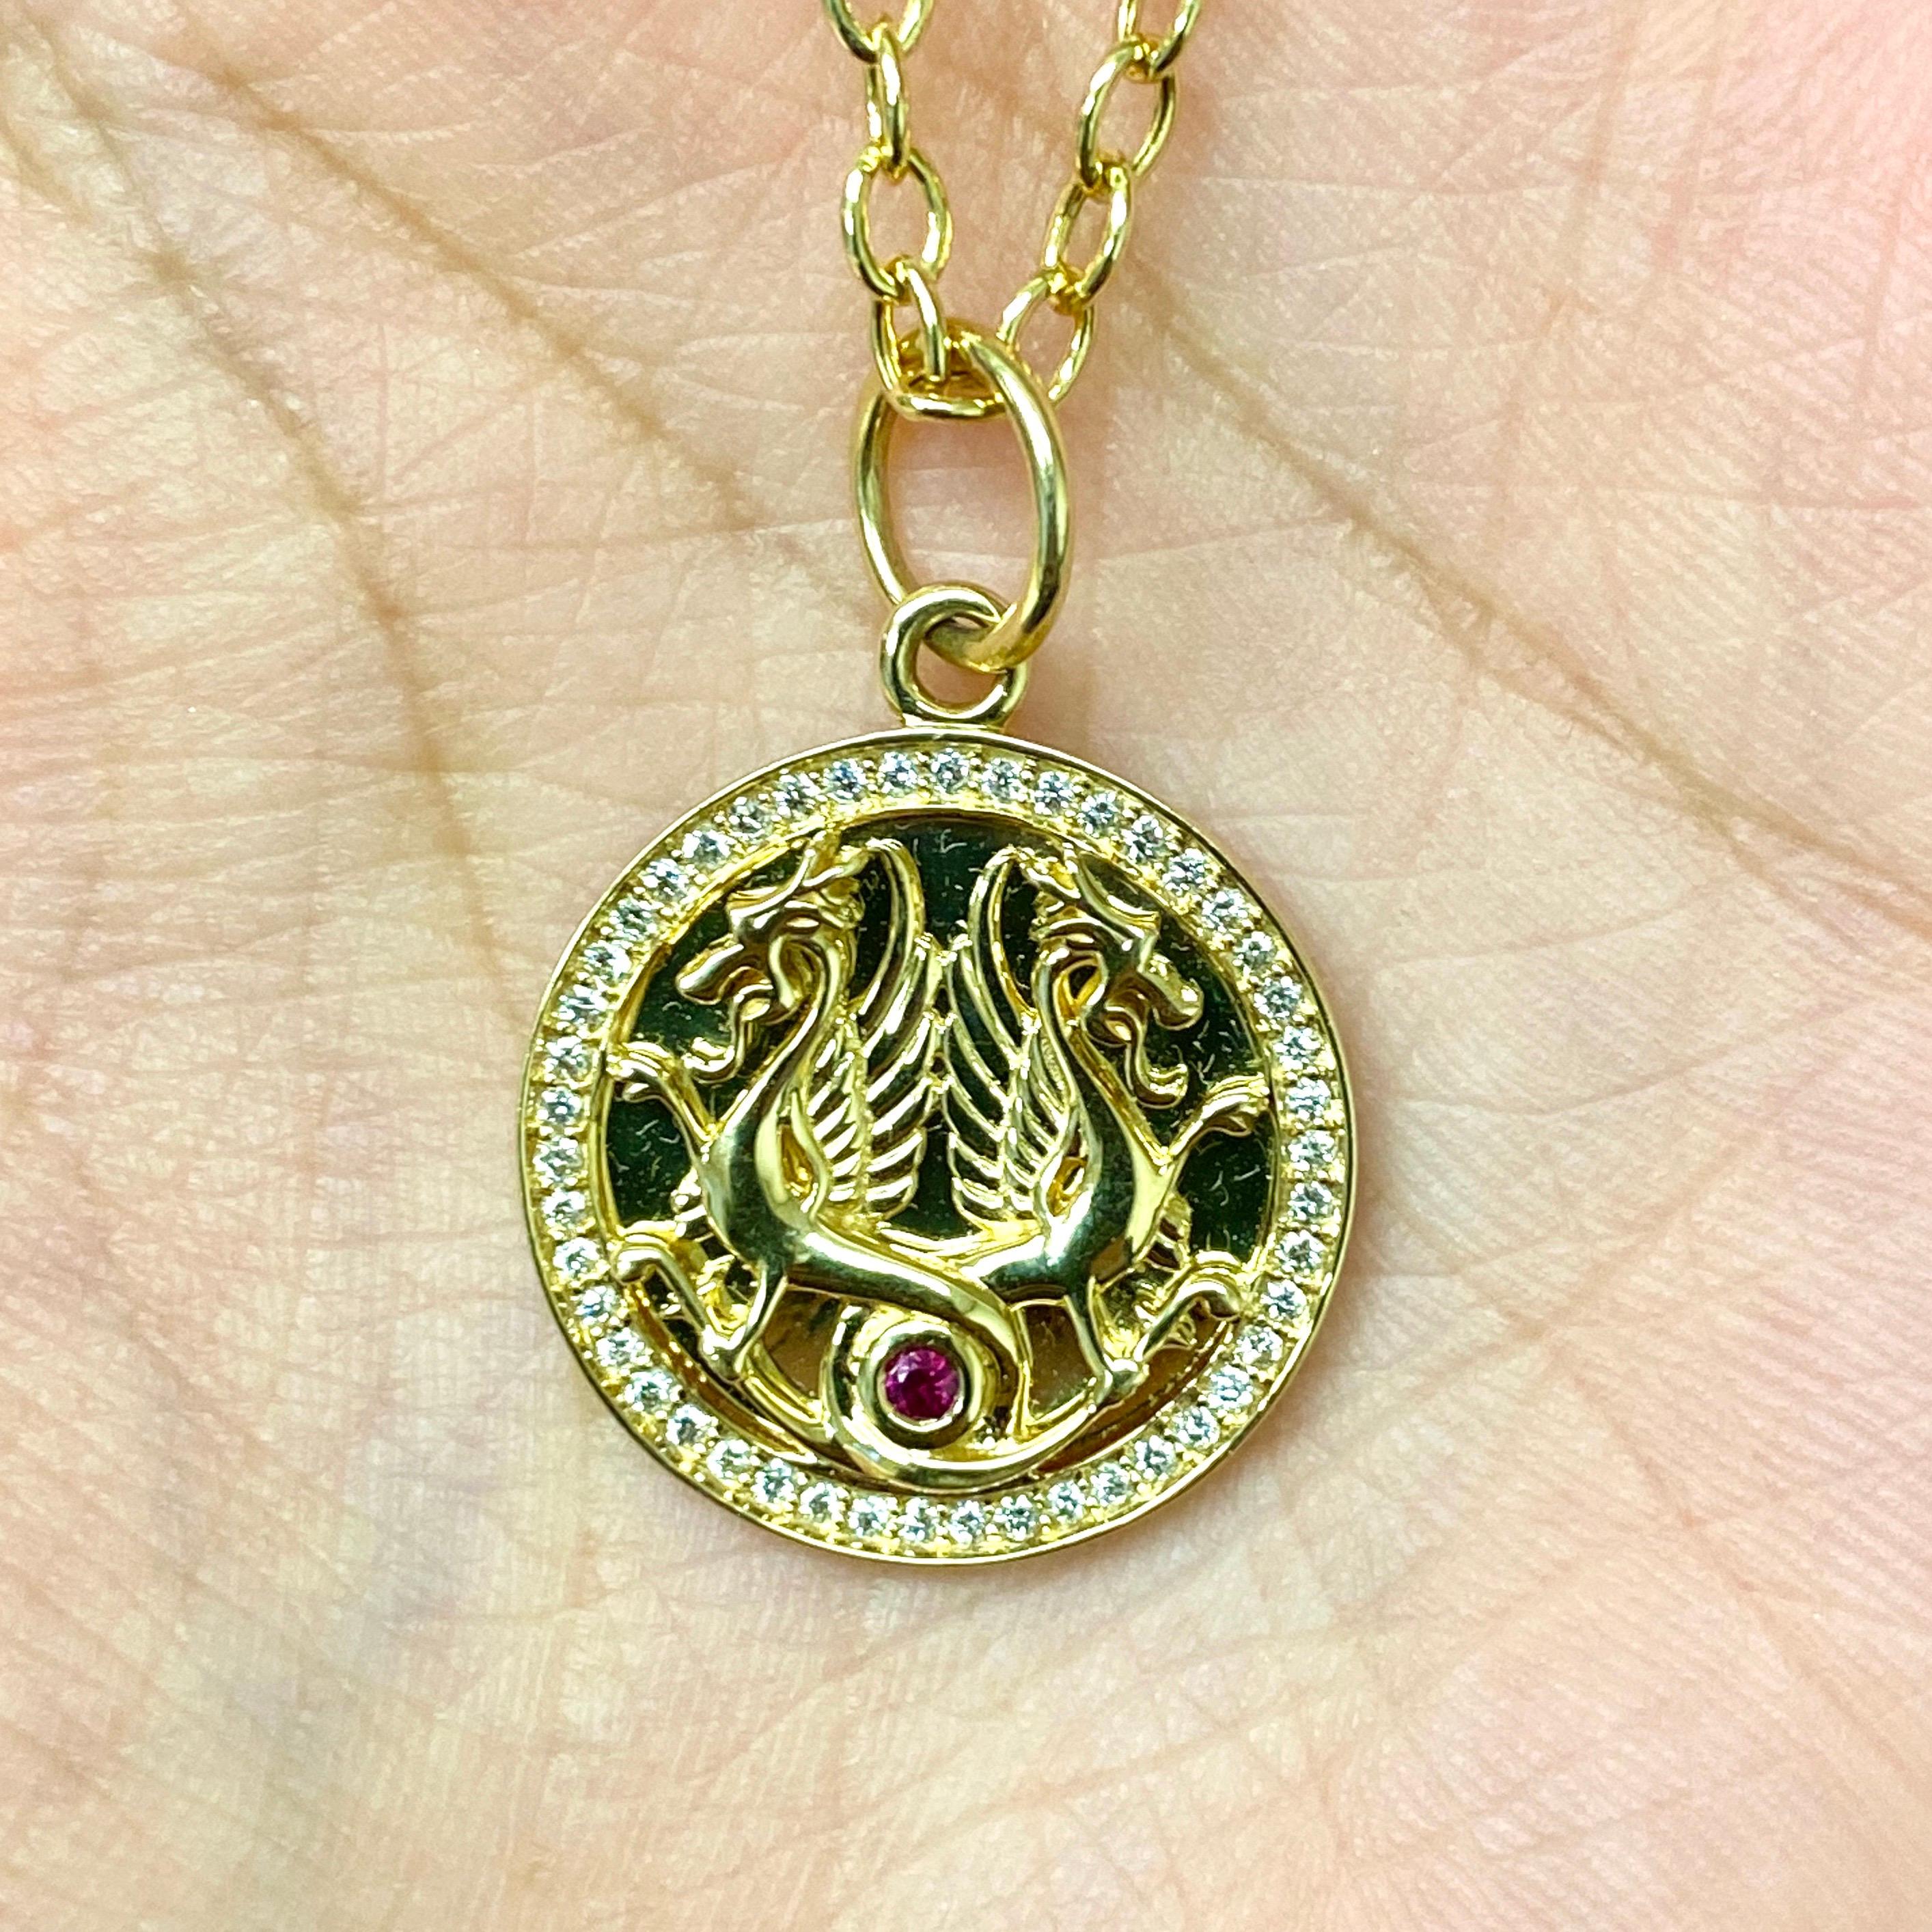 Created in 18 karat yellow gold
Ruby 0.04 ct approx
Diamonds 0.2 ct approx
Chain sold separately
Limited Edition

Exquisite in 18k yellow gold, this limited-edition pendant is adorned with a 0.04ct ruby and 0.2ct of sparkling diamonds. Chain sold